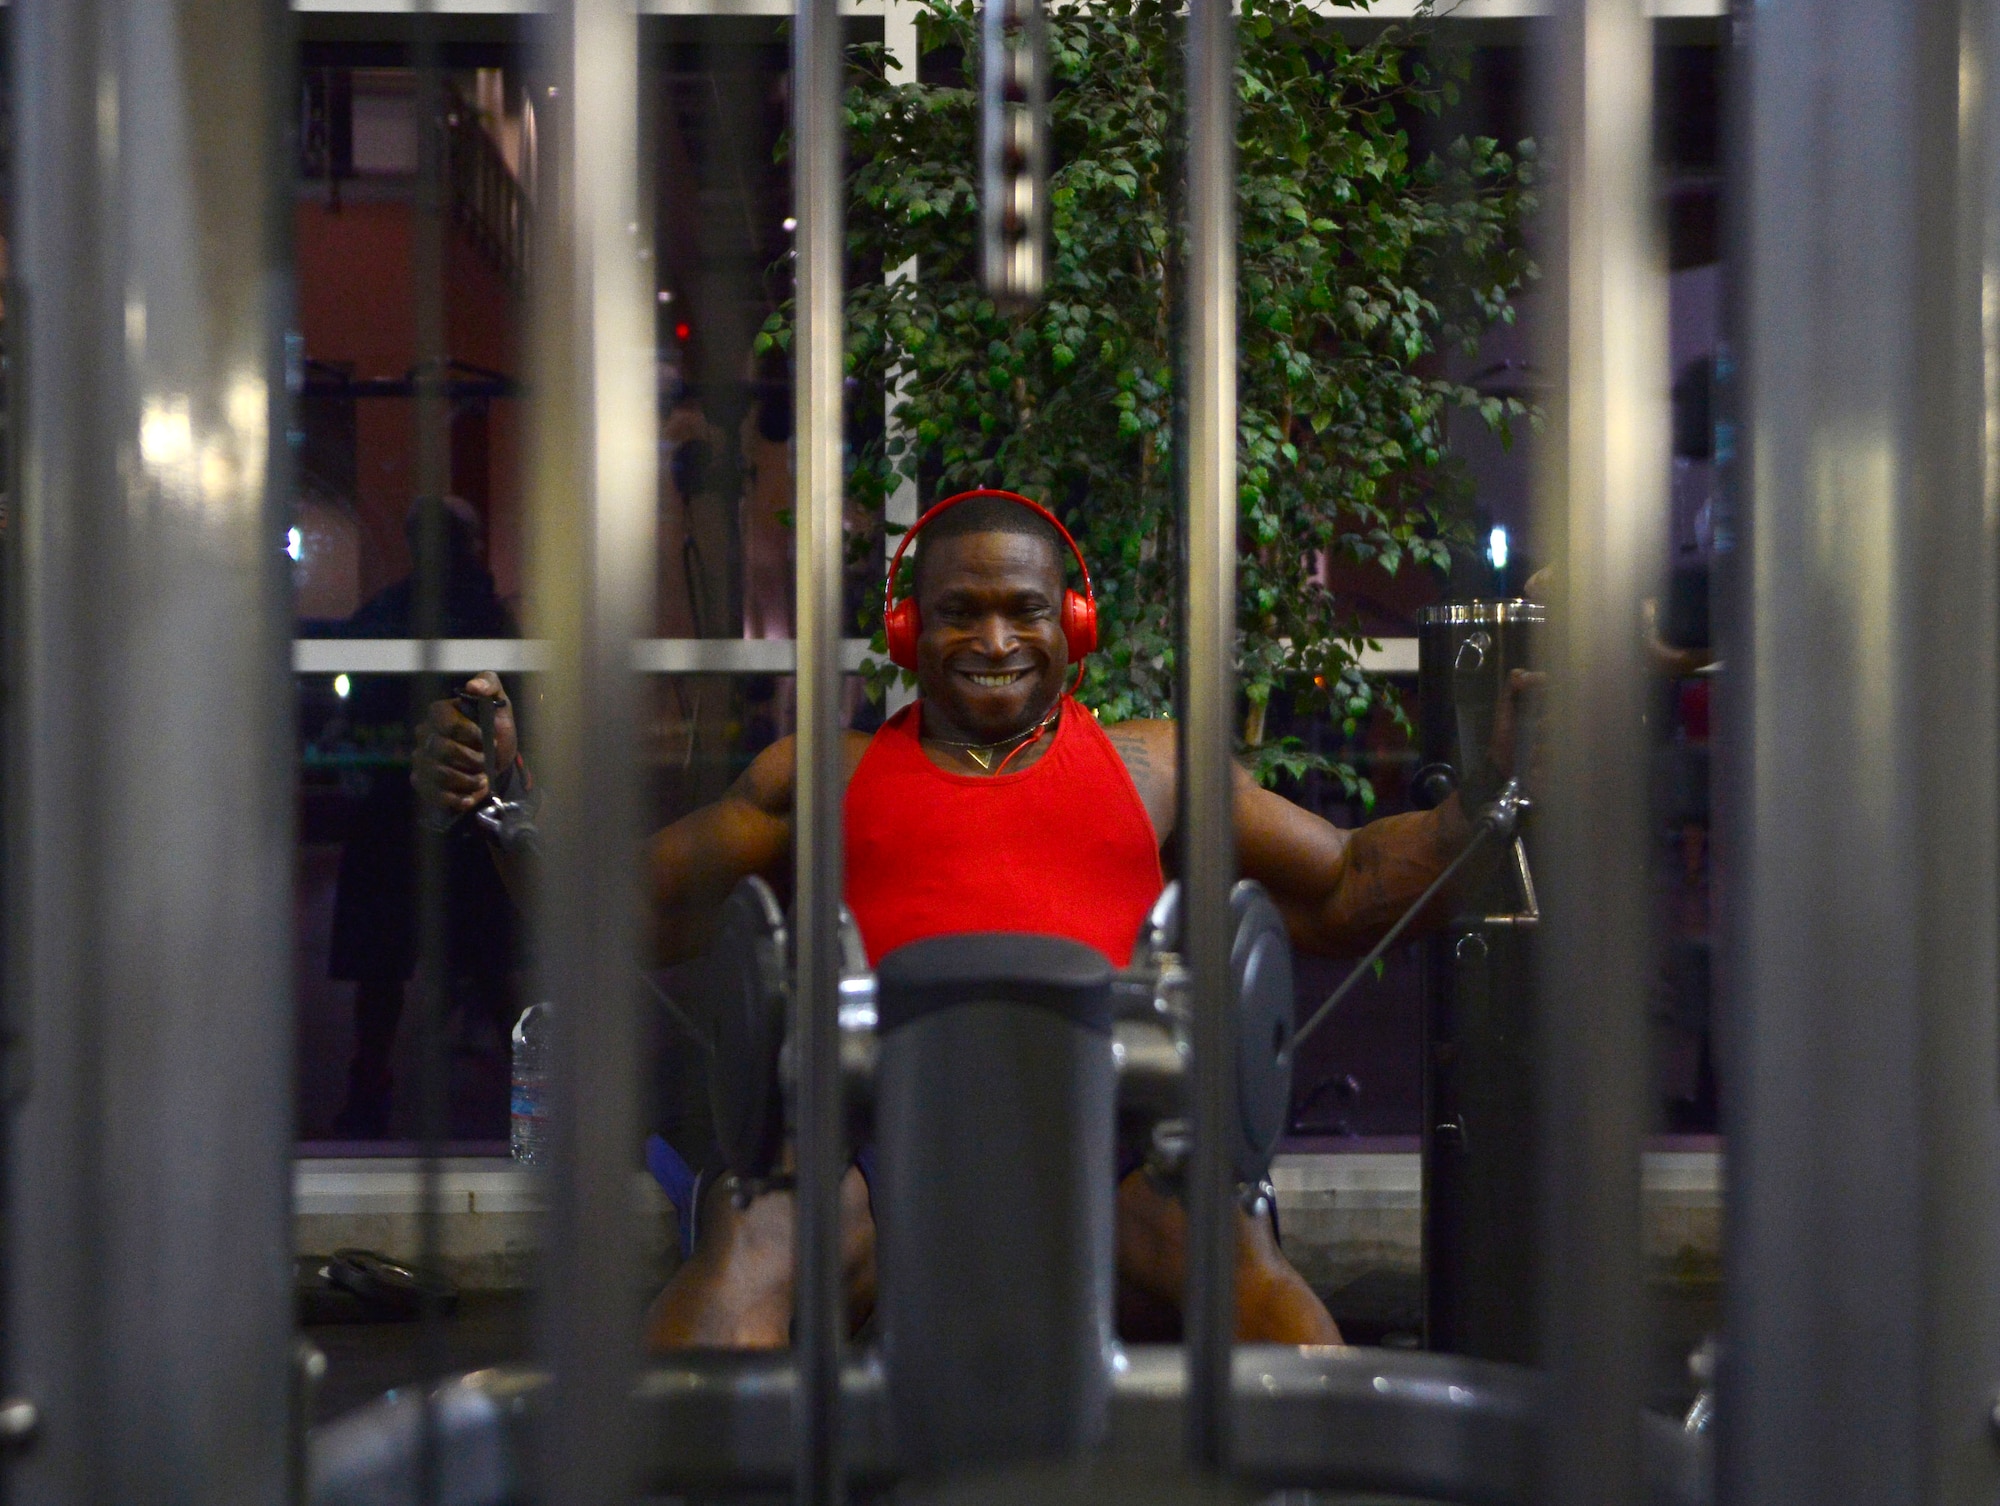 Tech. Sgt. David, 432nd Maintenance Group contract officer representative, performs rear deltoid fly’s during a workout Dec. 4, 2015, at Nellis Air Force Base, Nevada. David has been training for six years to be a professional body builder and recently earned his professional status after taking second place overall at the 2015 National Physique Committee National Bodybuilding Championships on Nov. 21, 2015.(U.S. Air Force photo by Airman 1st Class Christian Clausen/Released)